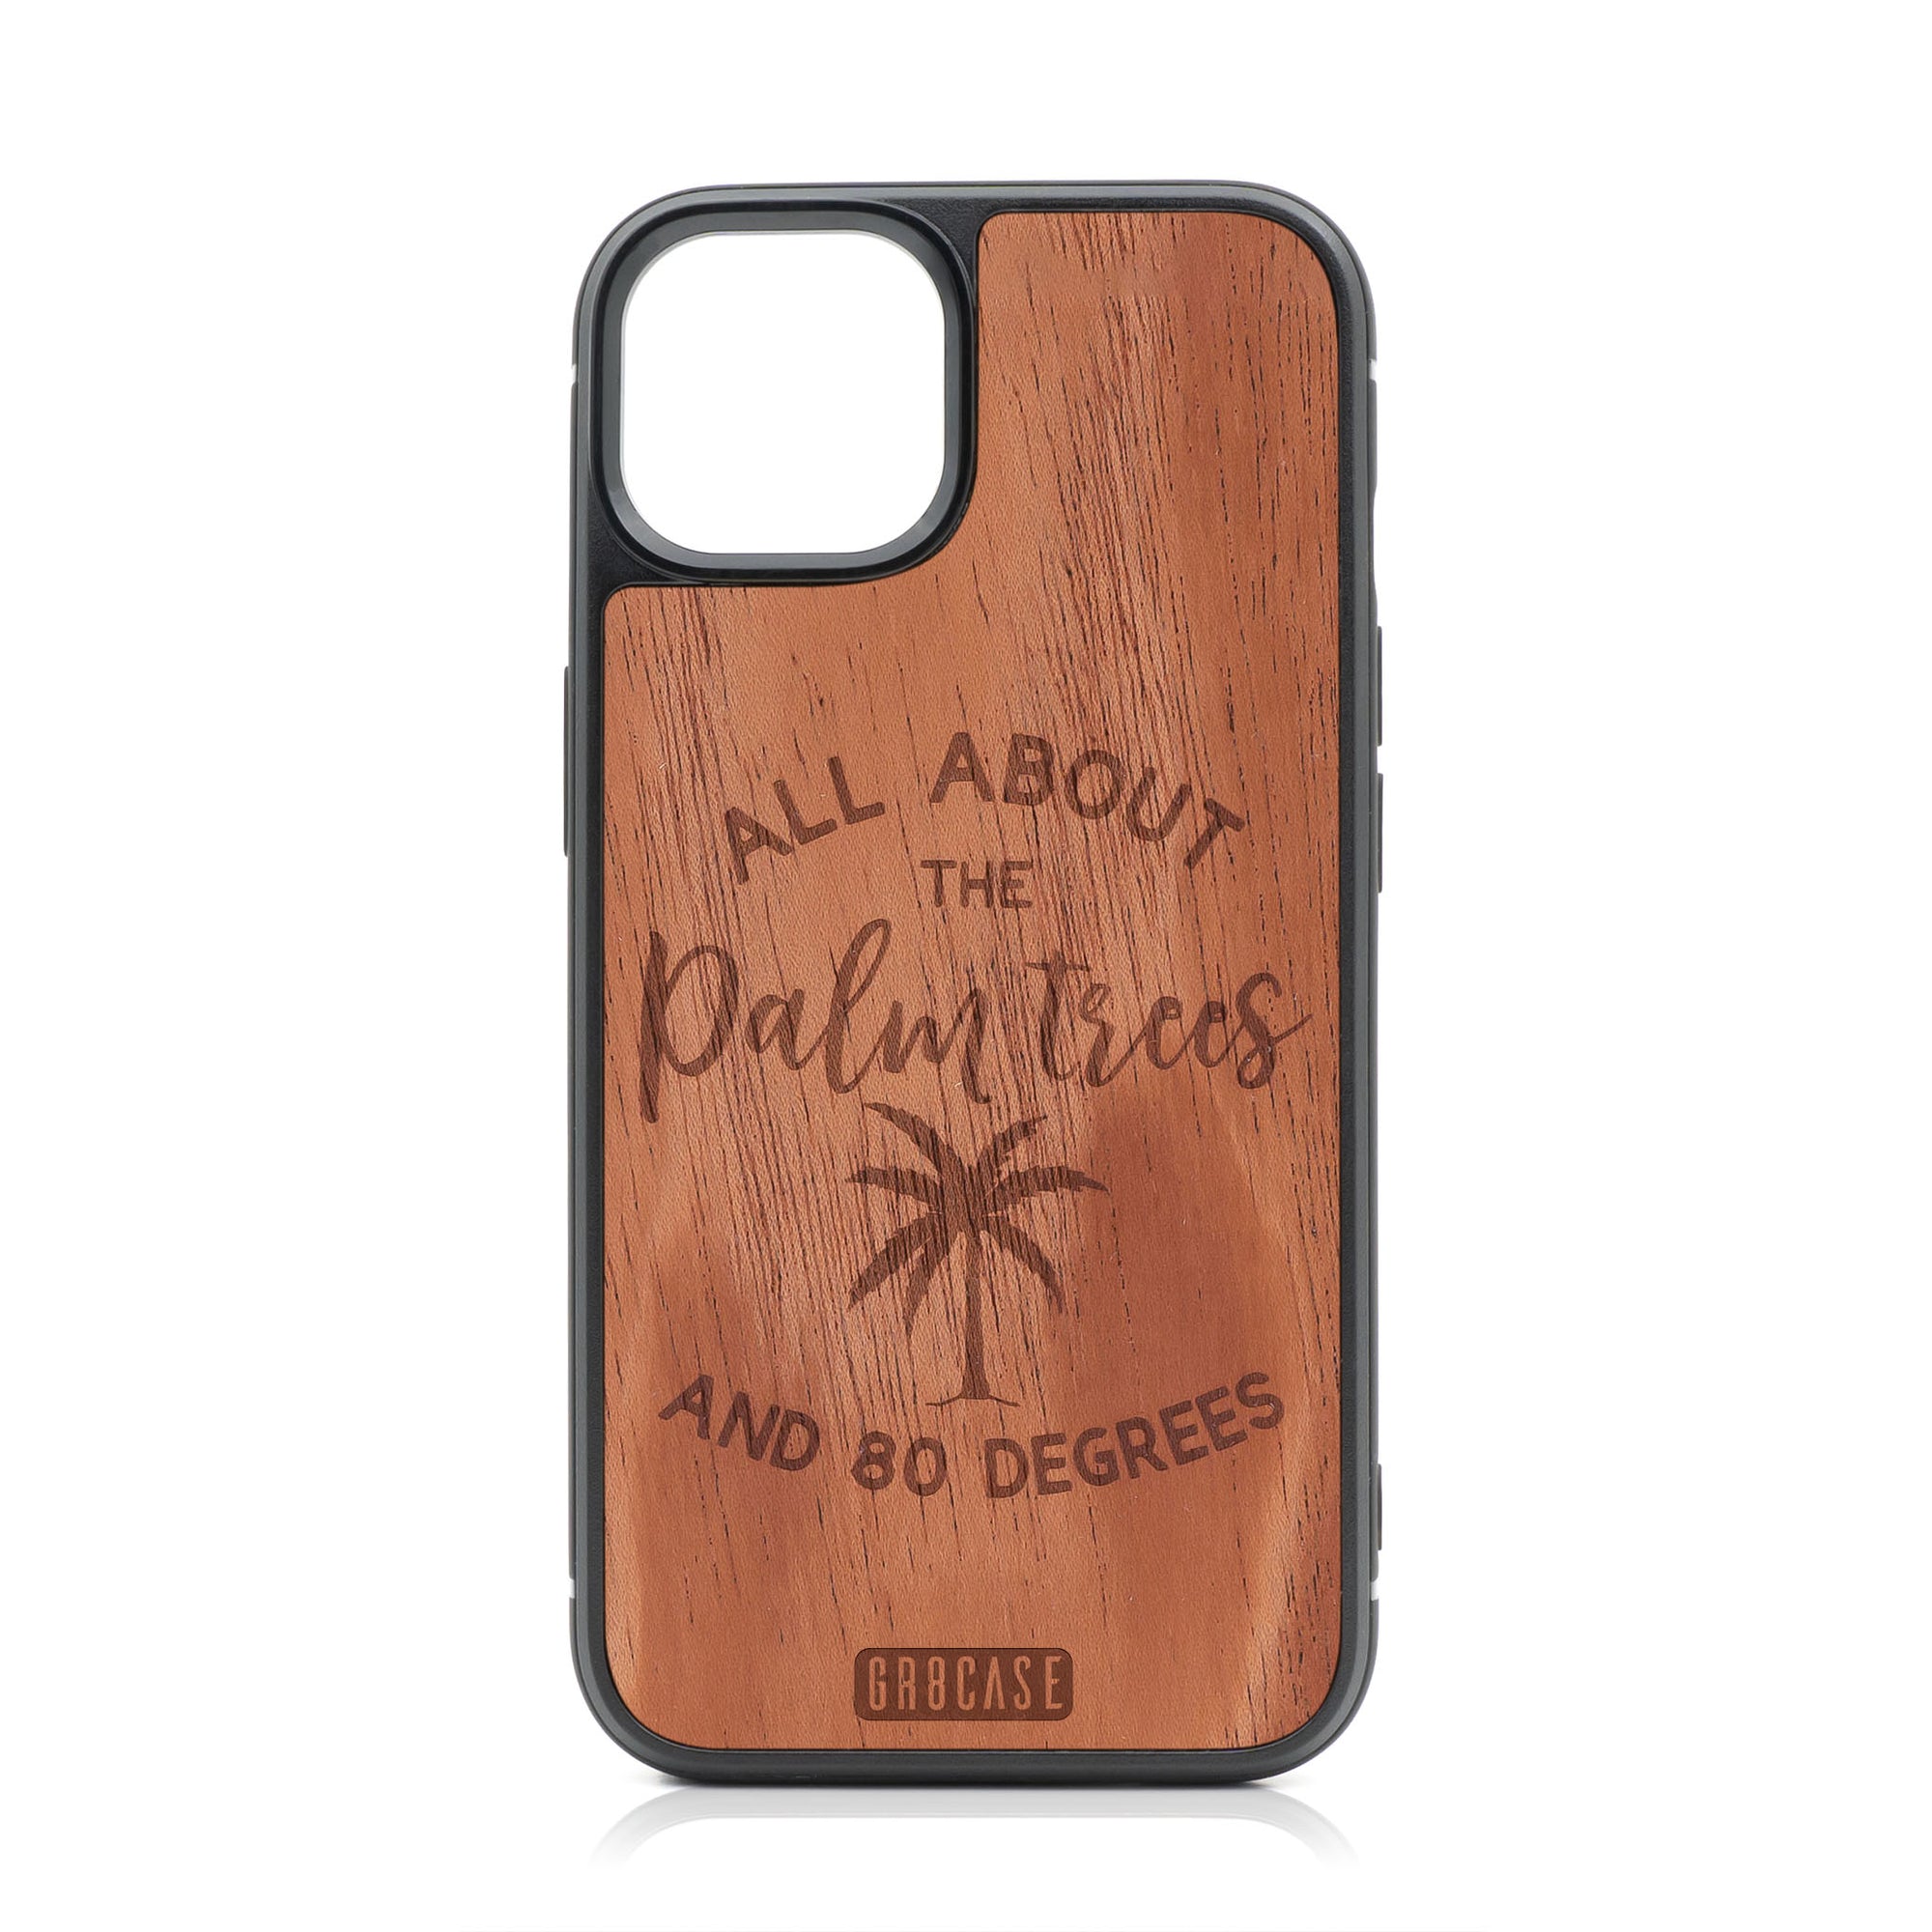 All About The Palm Trees And 80 Degree Design Wood Case For iPhone 13